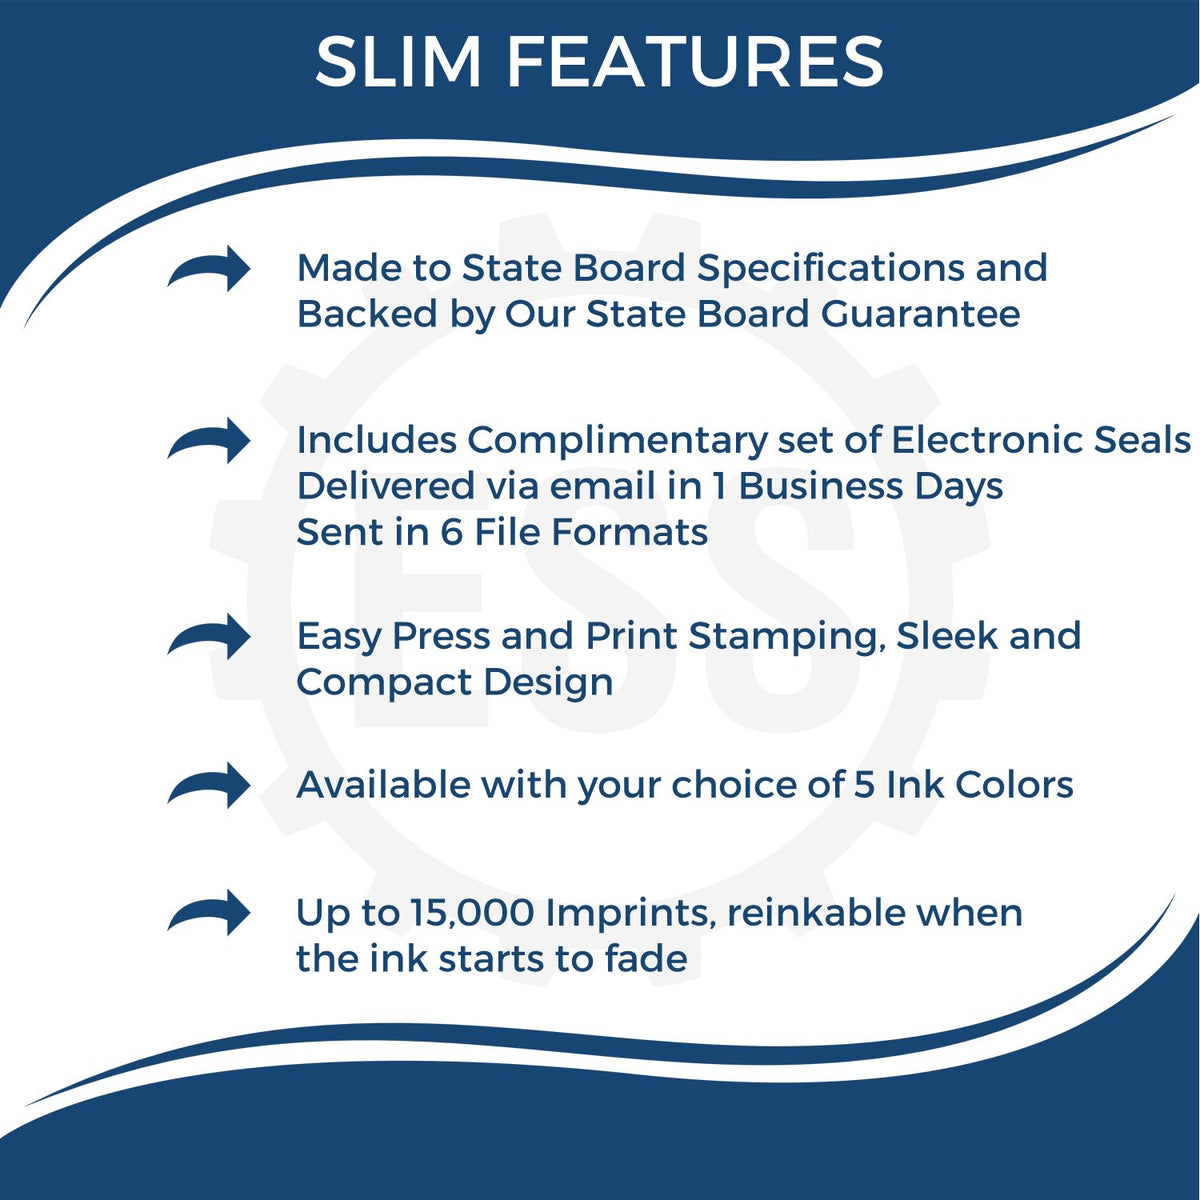 A picture of an infographic highlighting the selling points for the Super Slim South Carolina Notary Public Stamp